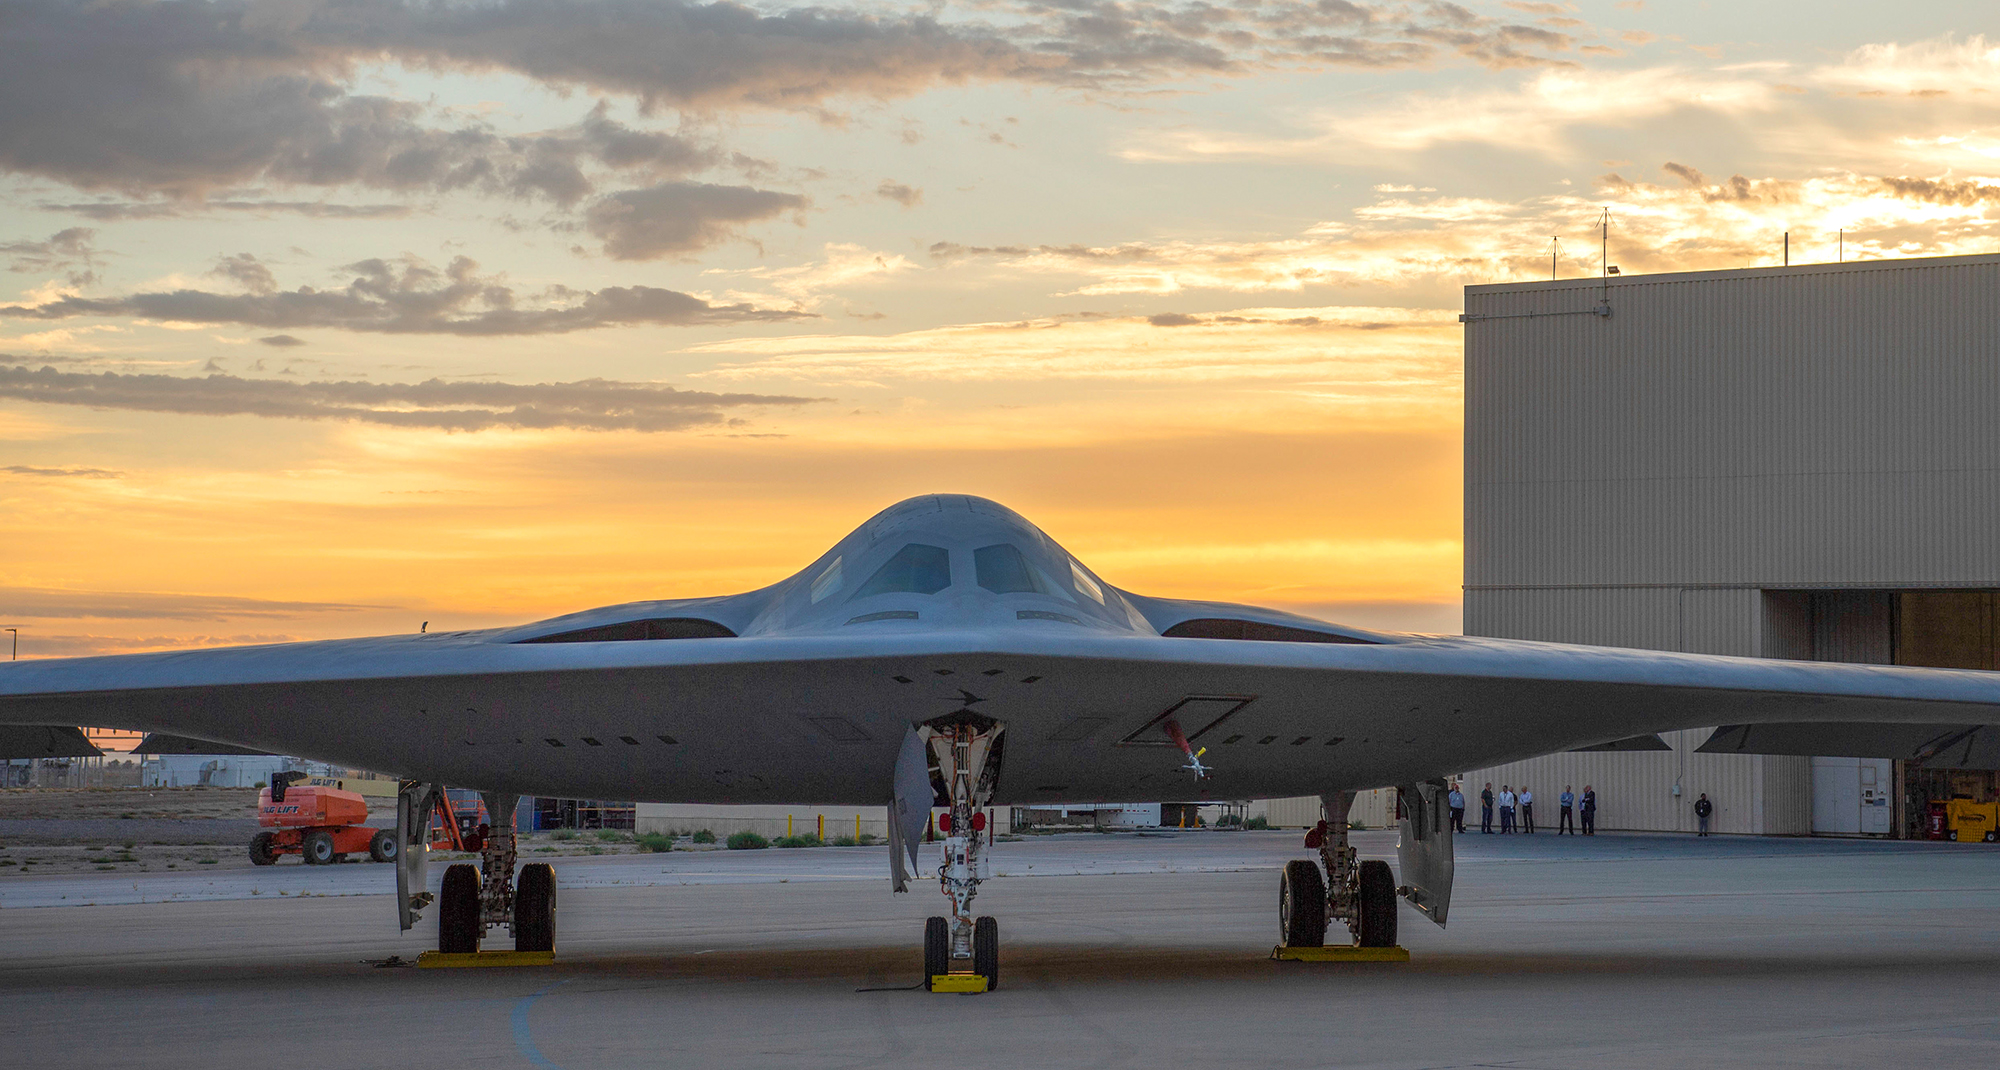 12 Things We Learned From the New B-21’s Taxi Tests and First Flight